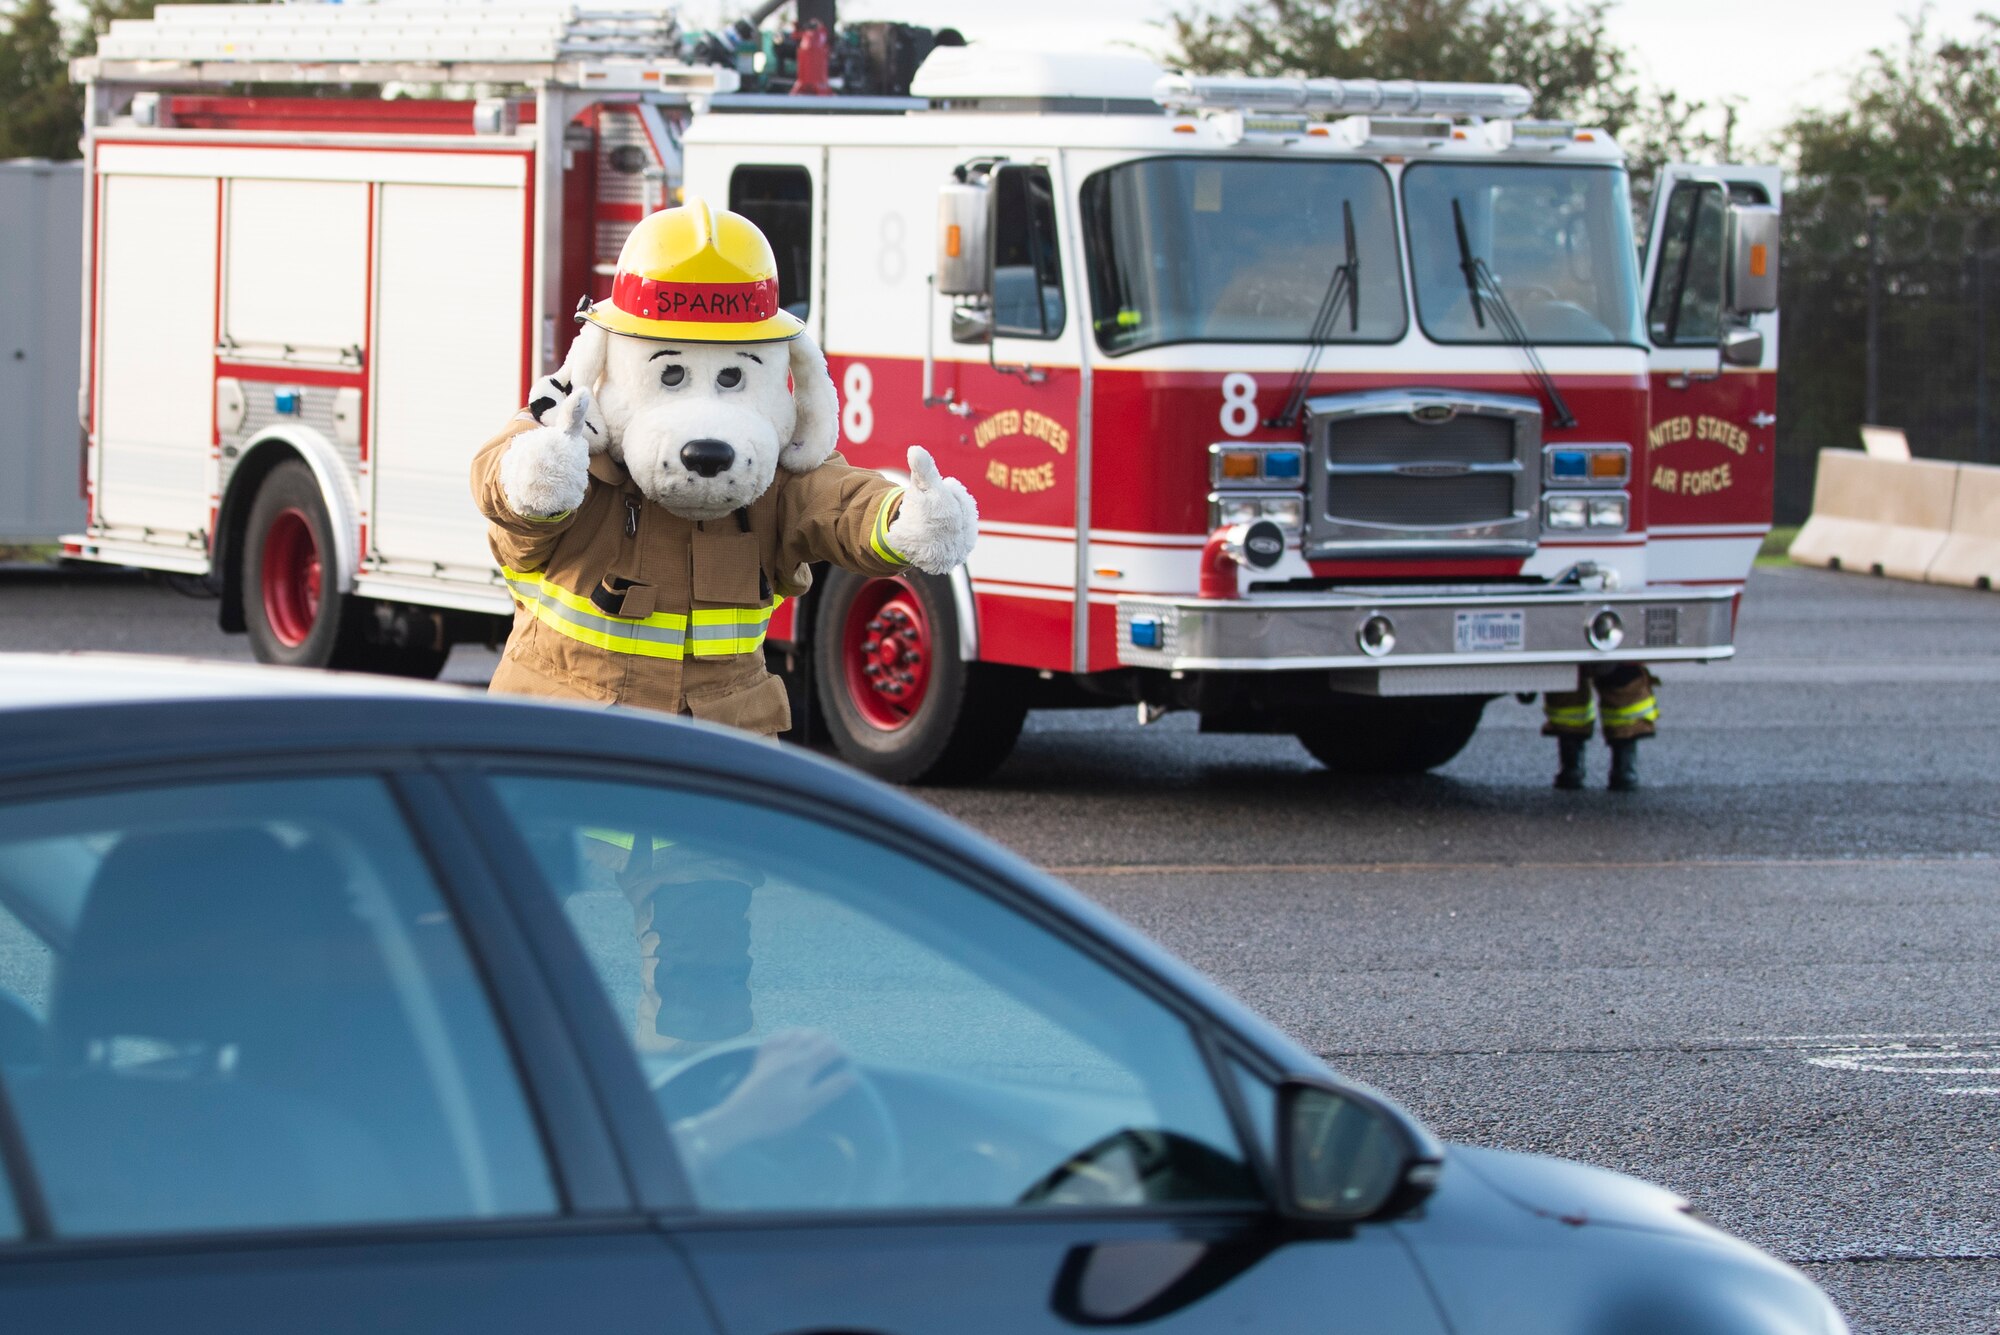 Sparky the Fire Dog from the 423rd Civil Engineer Squadron welcomes drivers to RAF Molesworth, England, Oct. 6, 2020 during Fire Prevention Week 2020. 423rd CES Fire and Emergency Services is dedicated to the safety and well-being of everyone who lives, works or plays on our installations. (U.S. Air Force photo by Senior Airman Jennifer Zima)